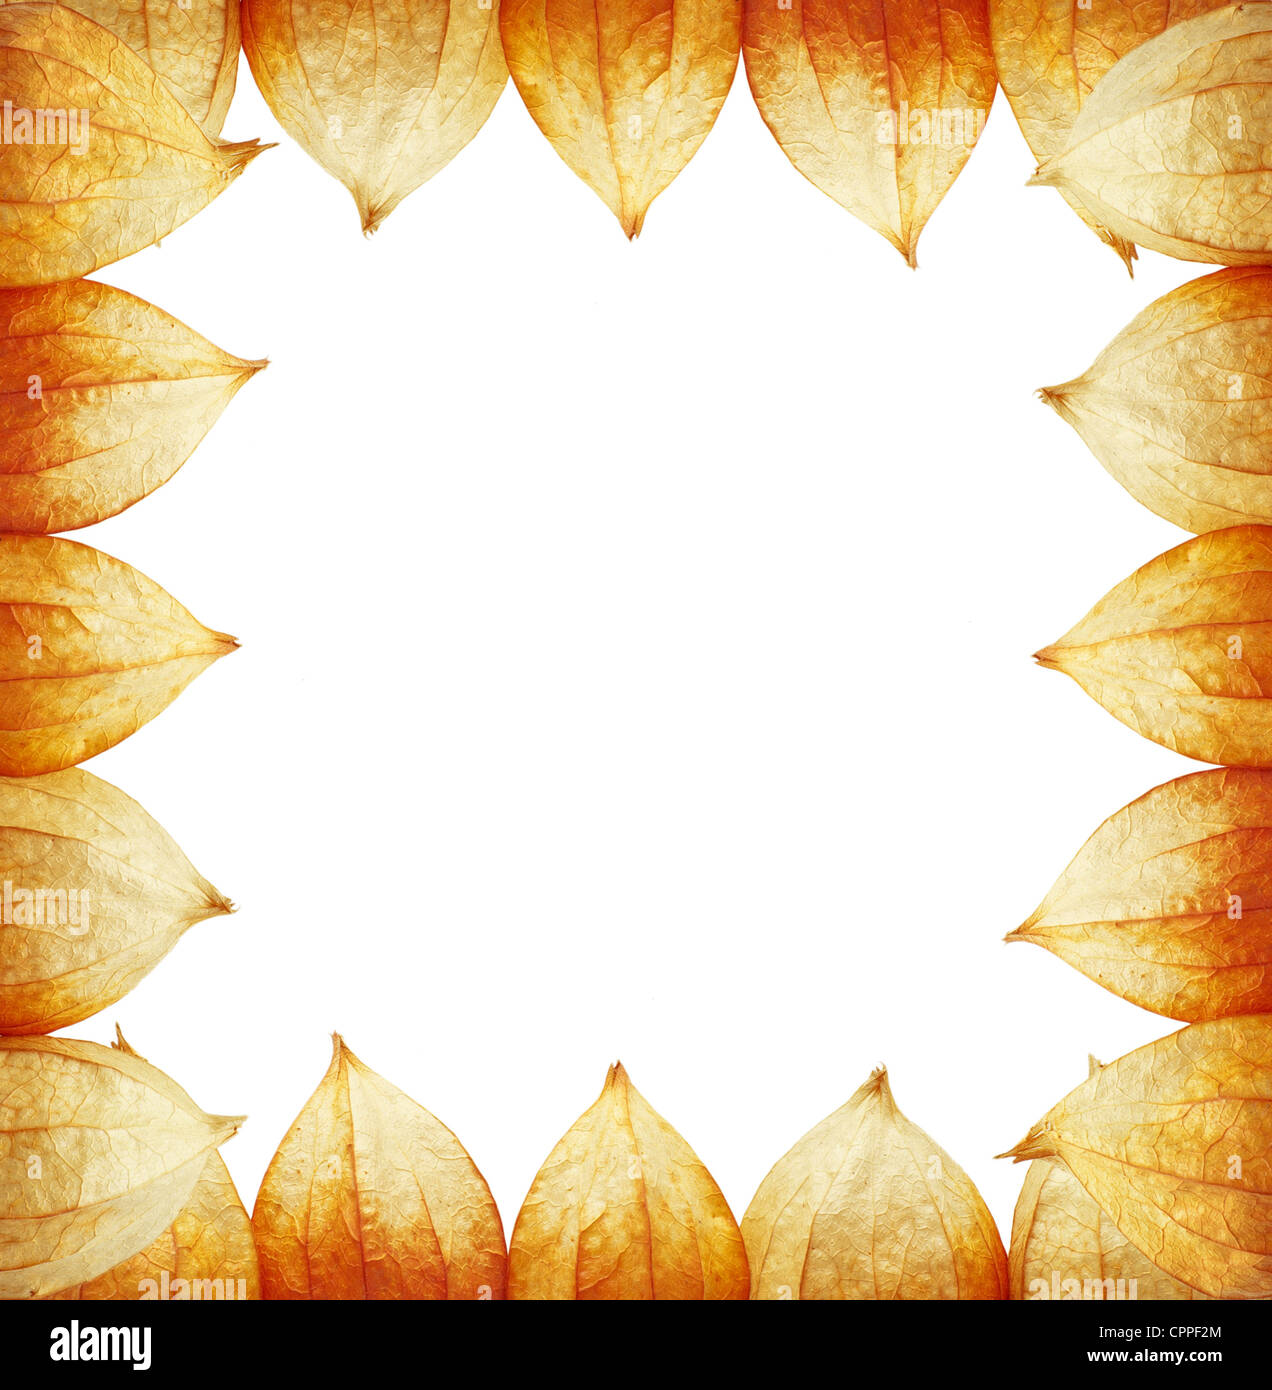 frame of Physalis on a background Stock Photo